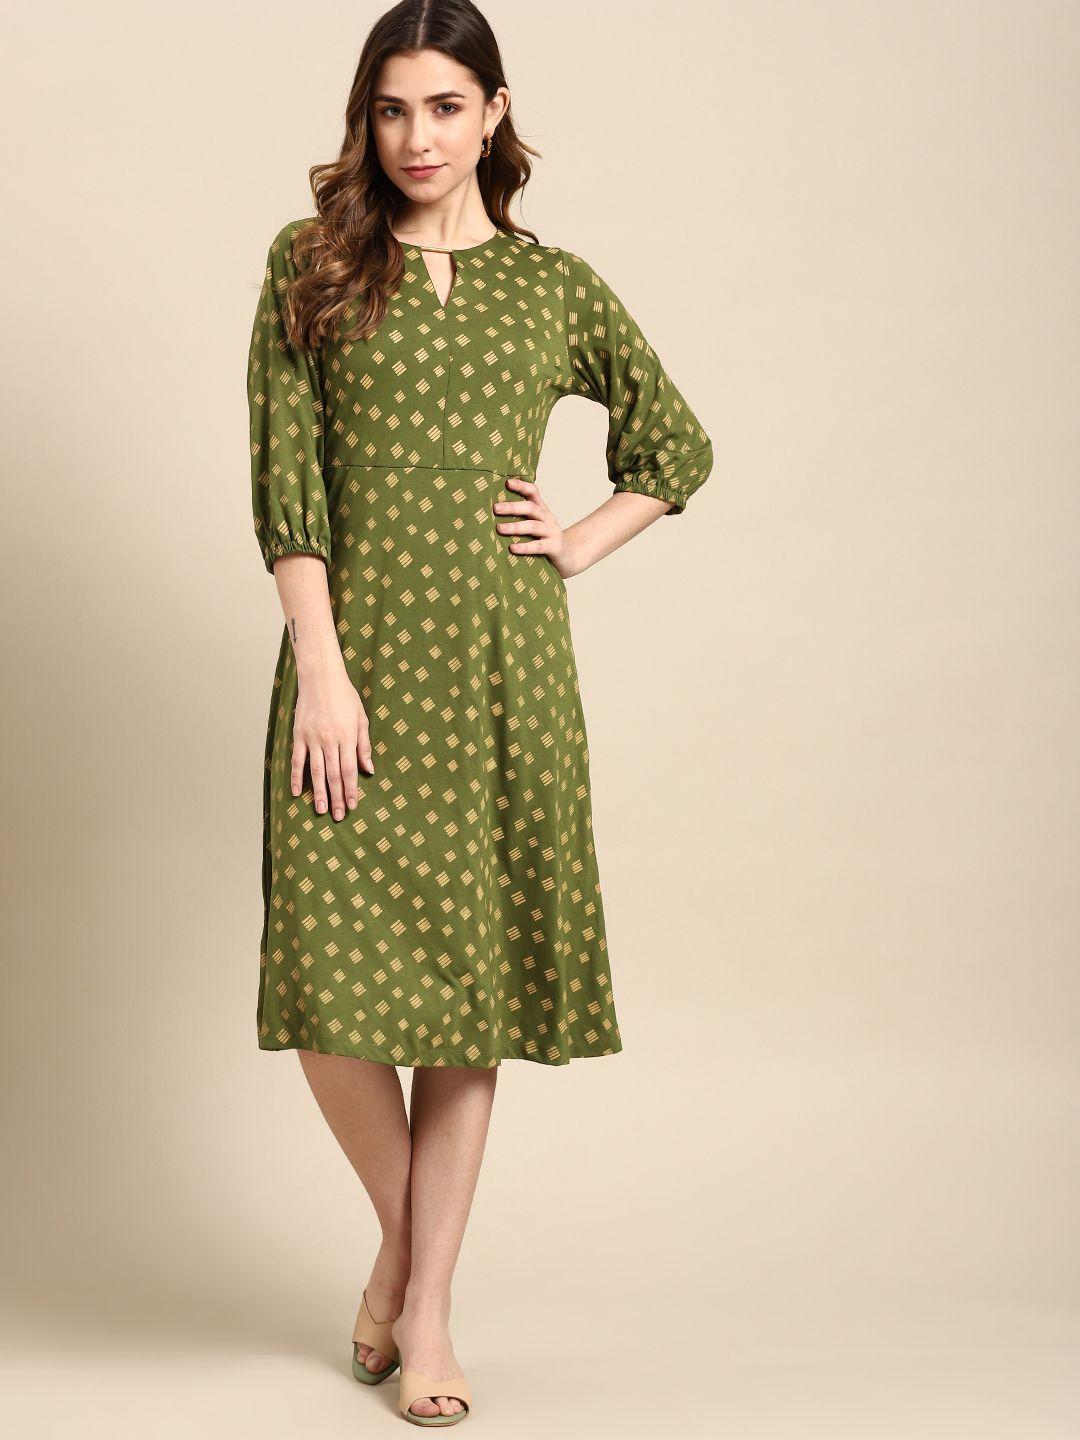 all-about-you-green-&-beige-keyhole-neck-a-line-dress